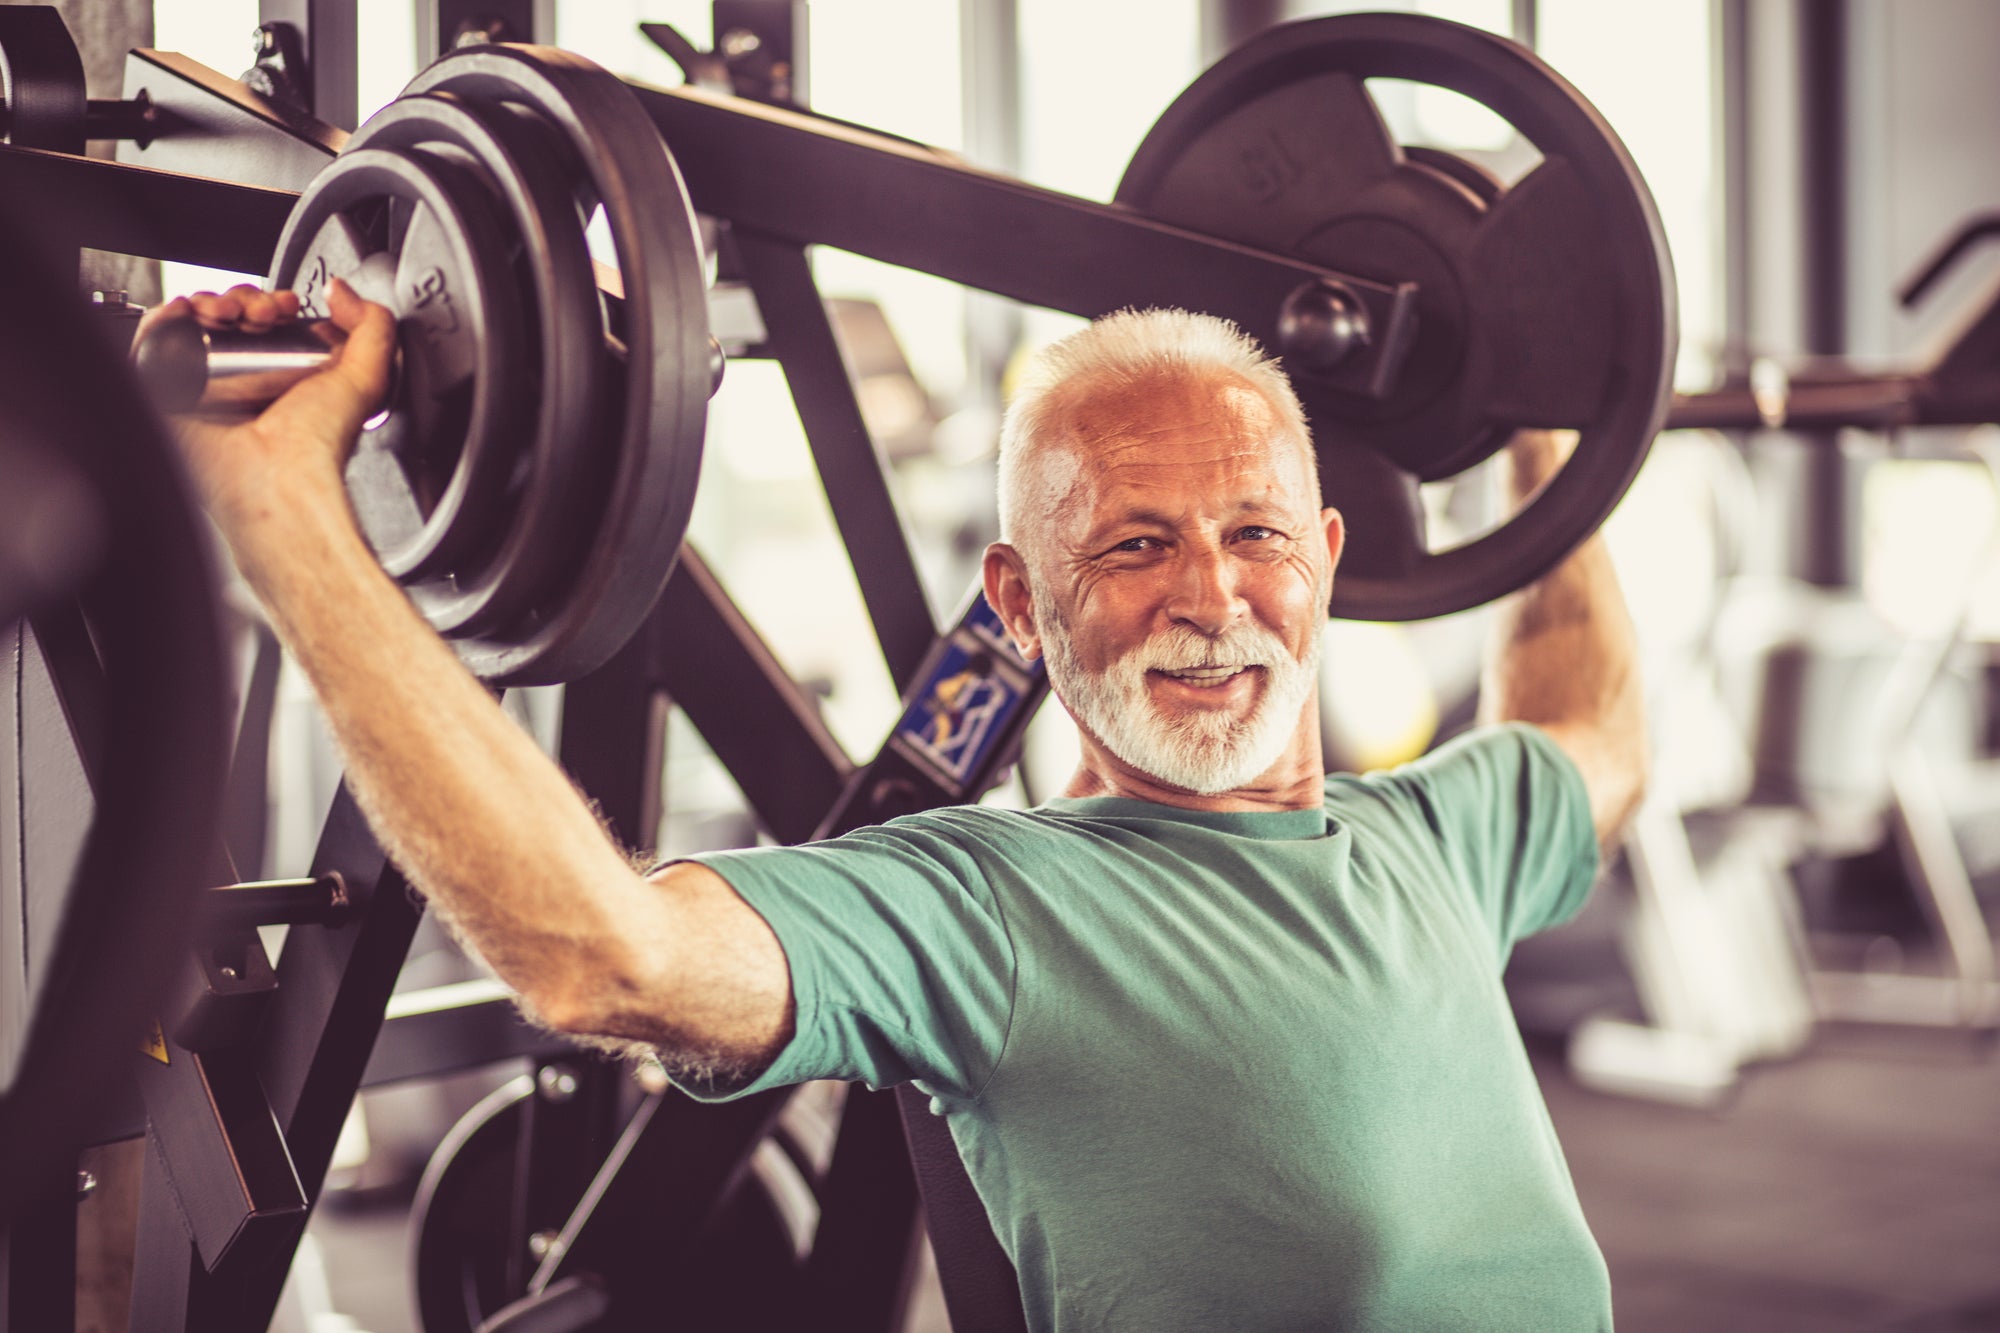 Best Workout Program for Men in Their 50s